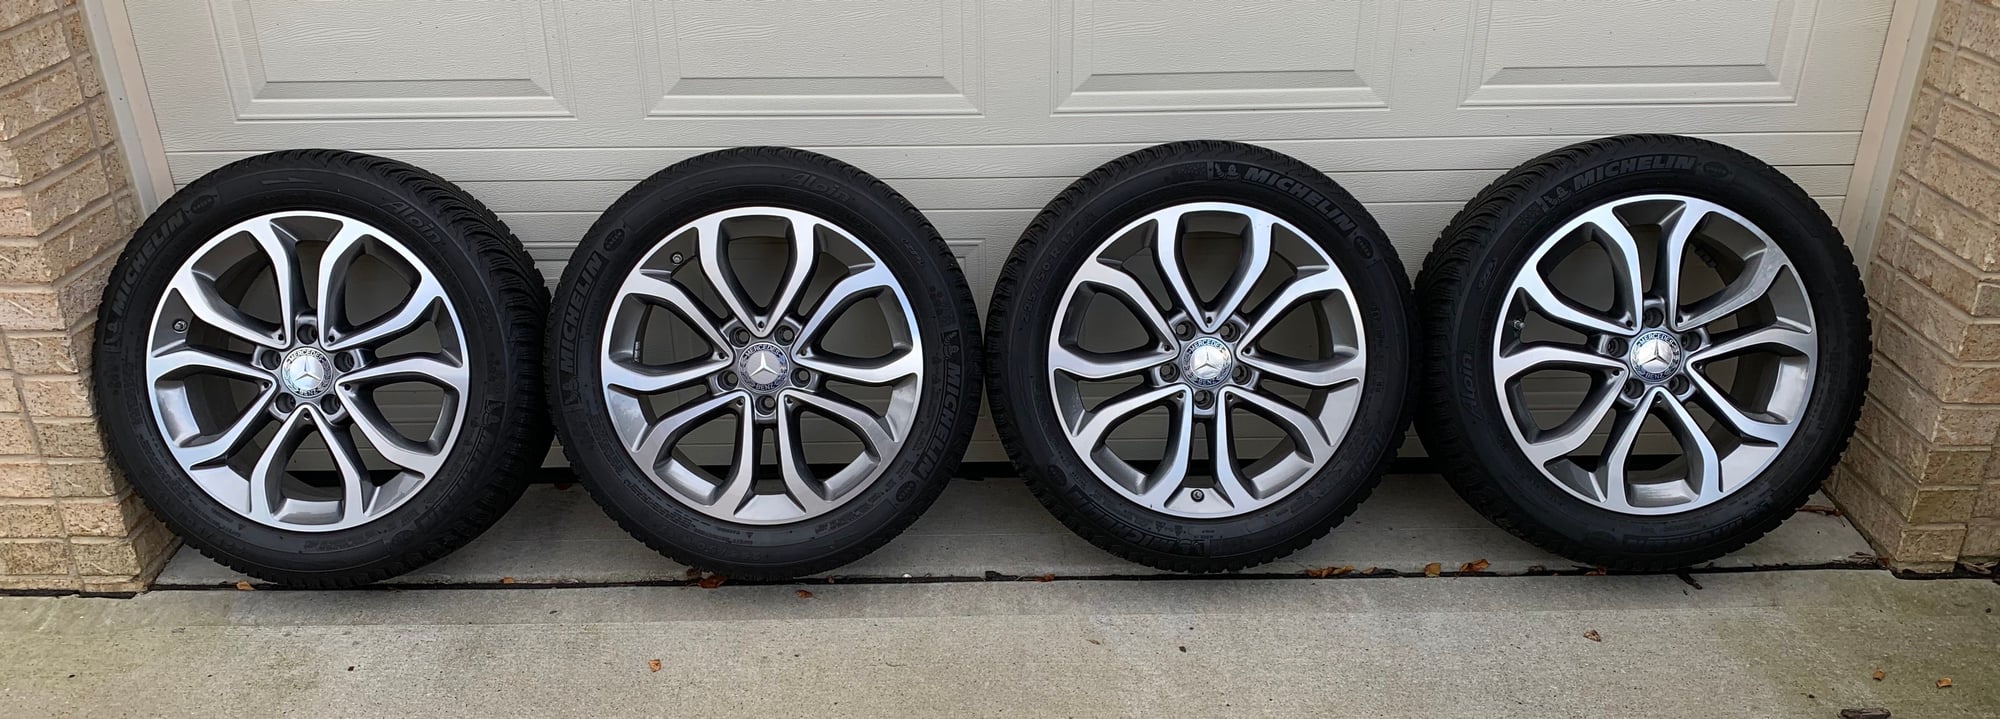 Wheels and Tires/Axles - W205 C300 17" OEM winter wheels with Alpin tires & TPMS! - Used - 2014 to 2020 Mercedes-Benz C300 - Pittsburgh, PA 15229, United States